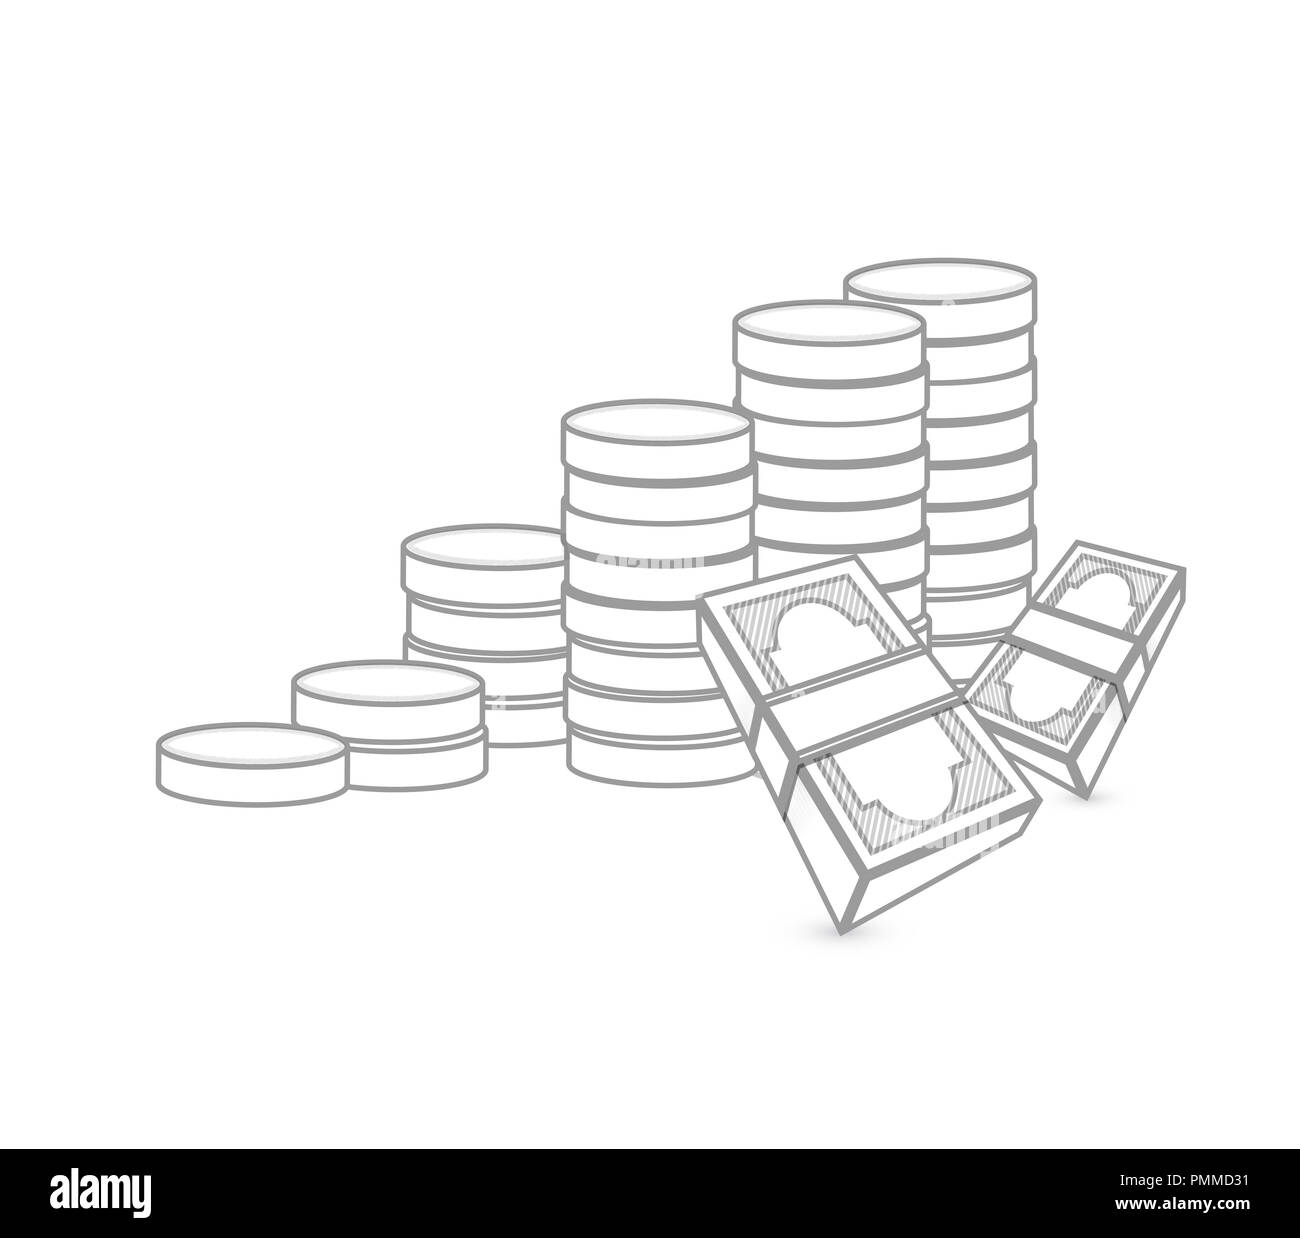 Usd coins Black and White Stock Photos & Images - Alamy